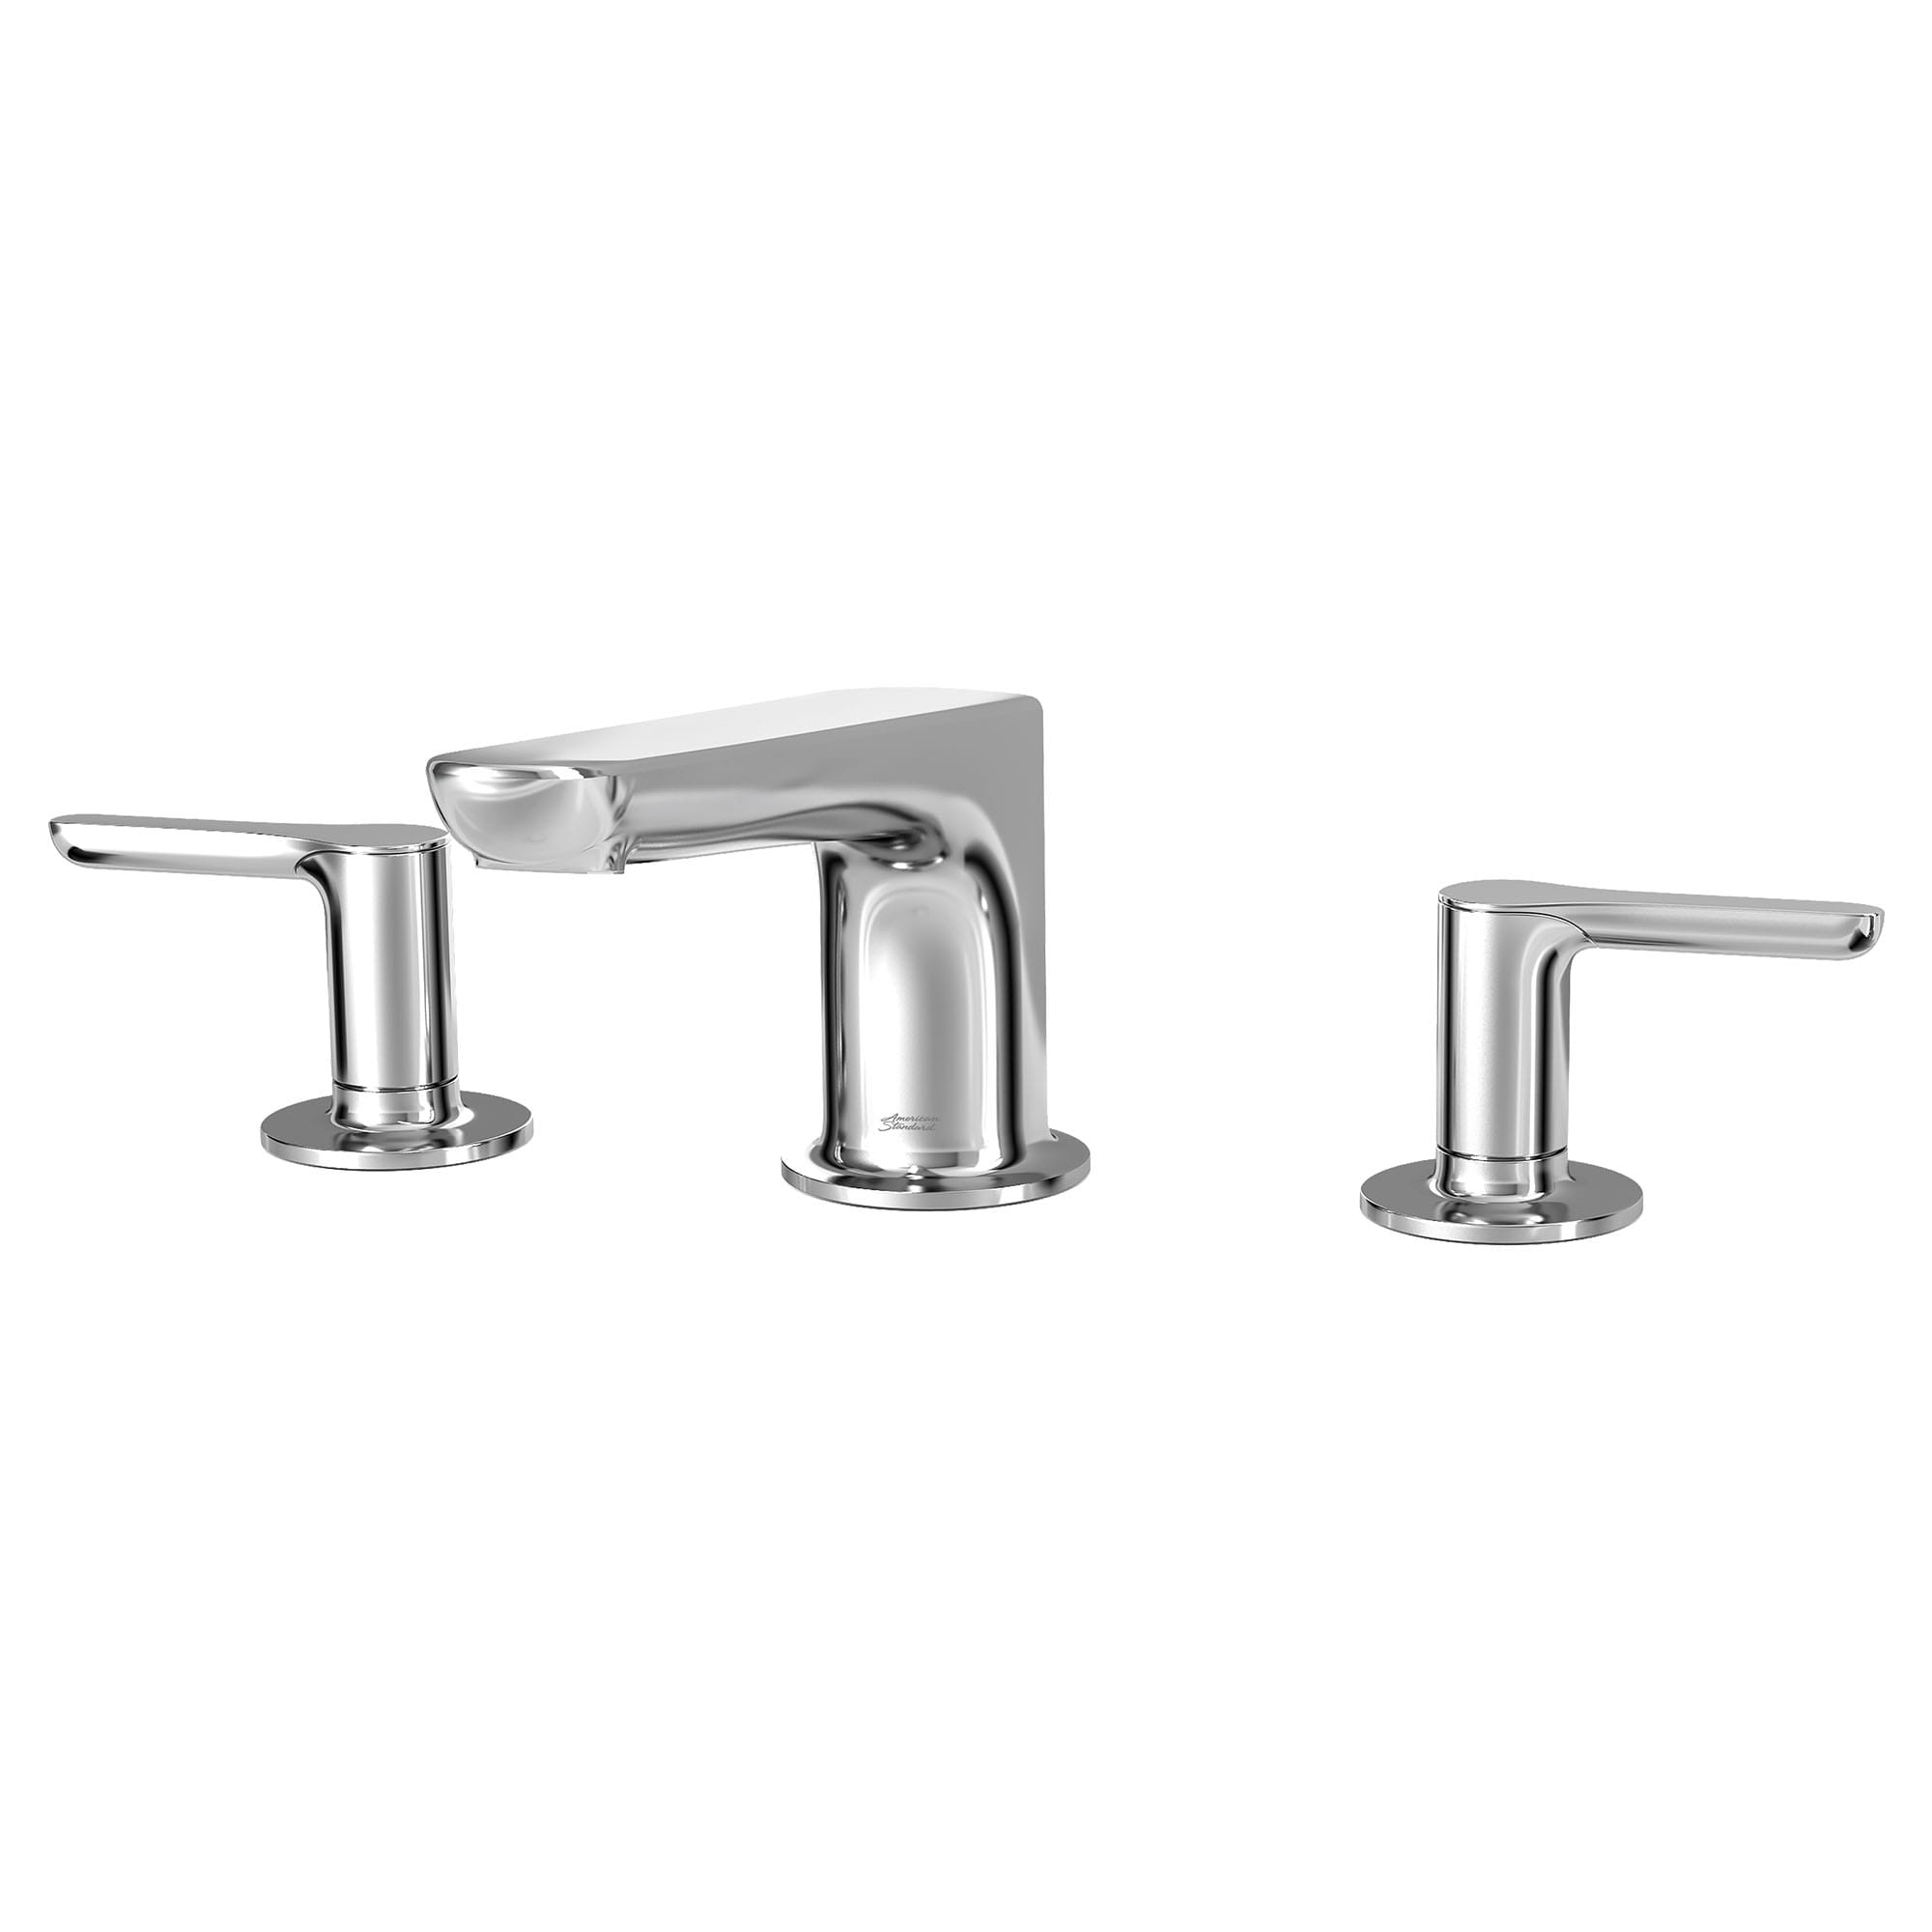 Studio S Bathtub Faucet With Lever Handles for Flash Rough In Valve CHROME